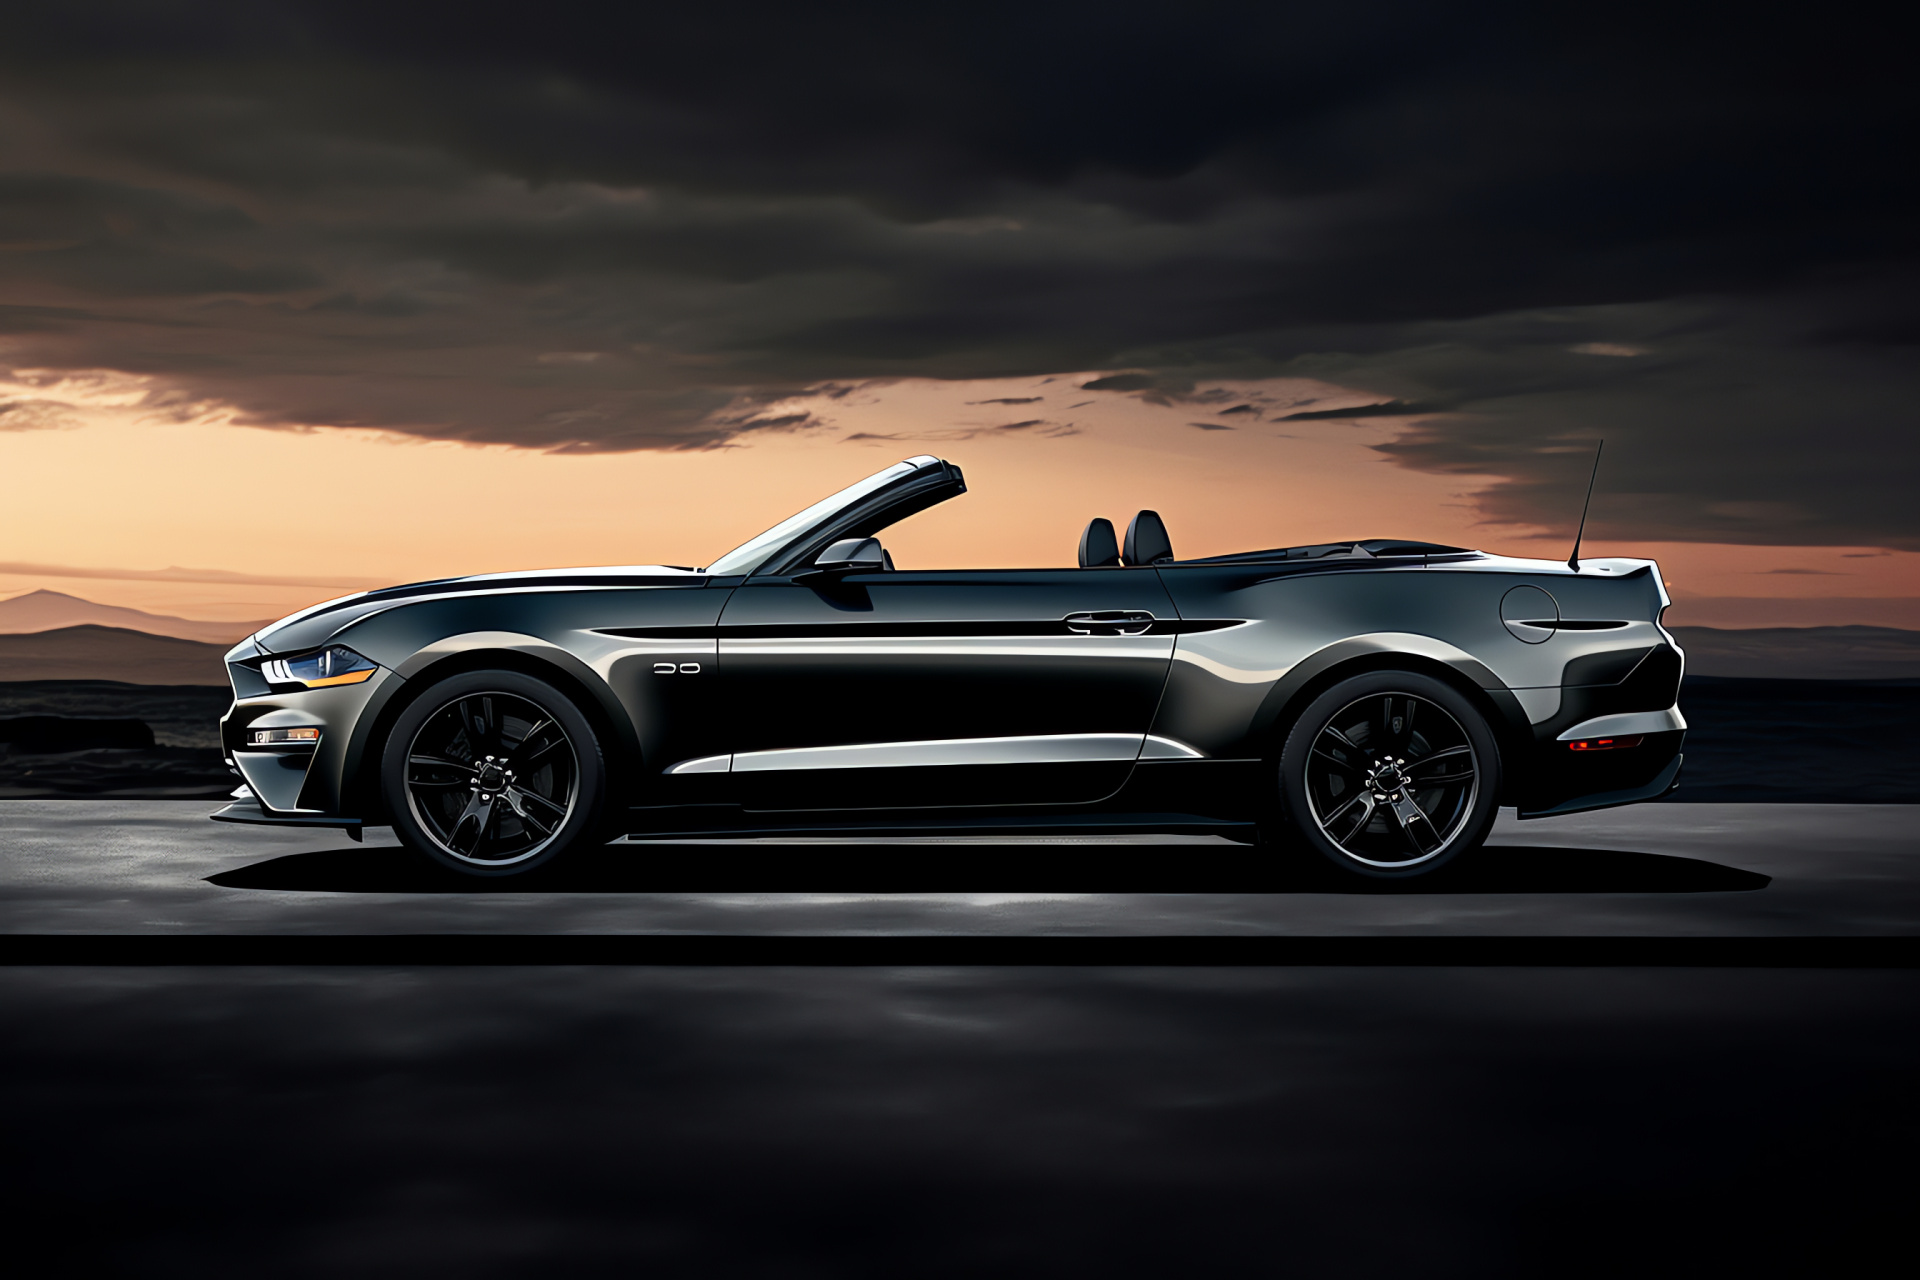 Bicolor Mustang contrast, Mustang flank view, Streamlined auto form, Dual-tone elegance, Automotive finesse, HD Desktop Image